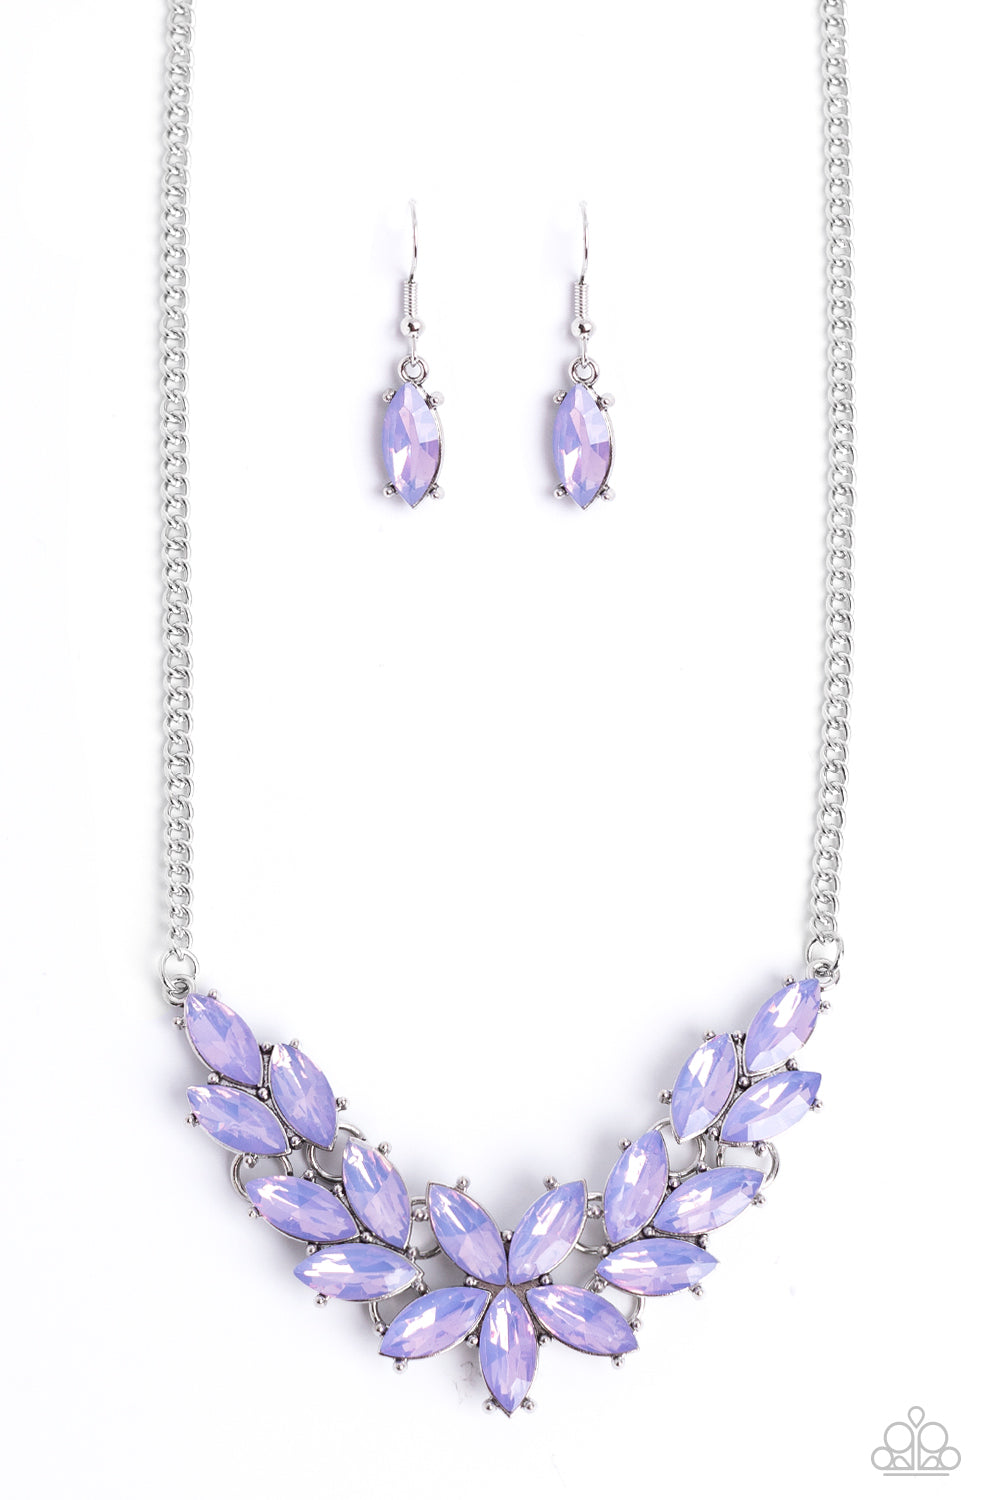 Bridal Party Wedding Jewelry Sets Statement Purple Delicate Crystal  Rhinestones Necklace Earrings Set Waterdrop Jewelry Sets - Jewelry Sets -  AliExpress